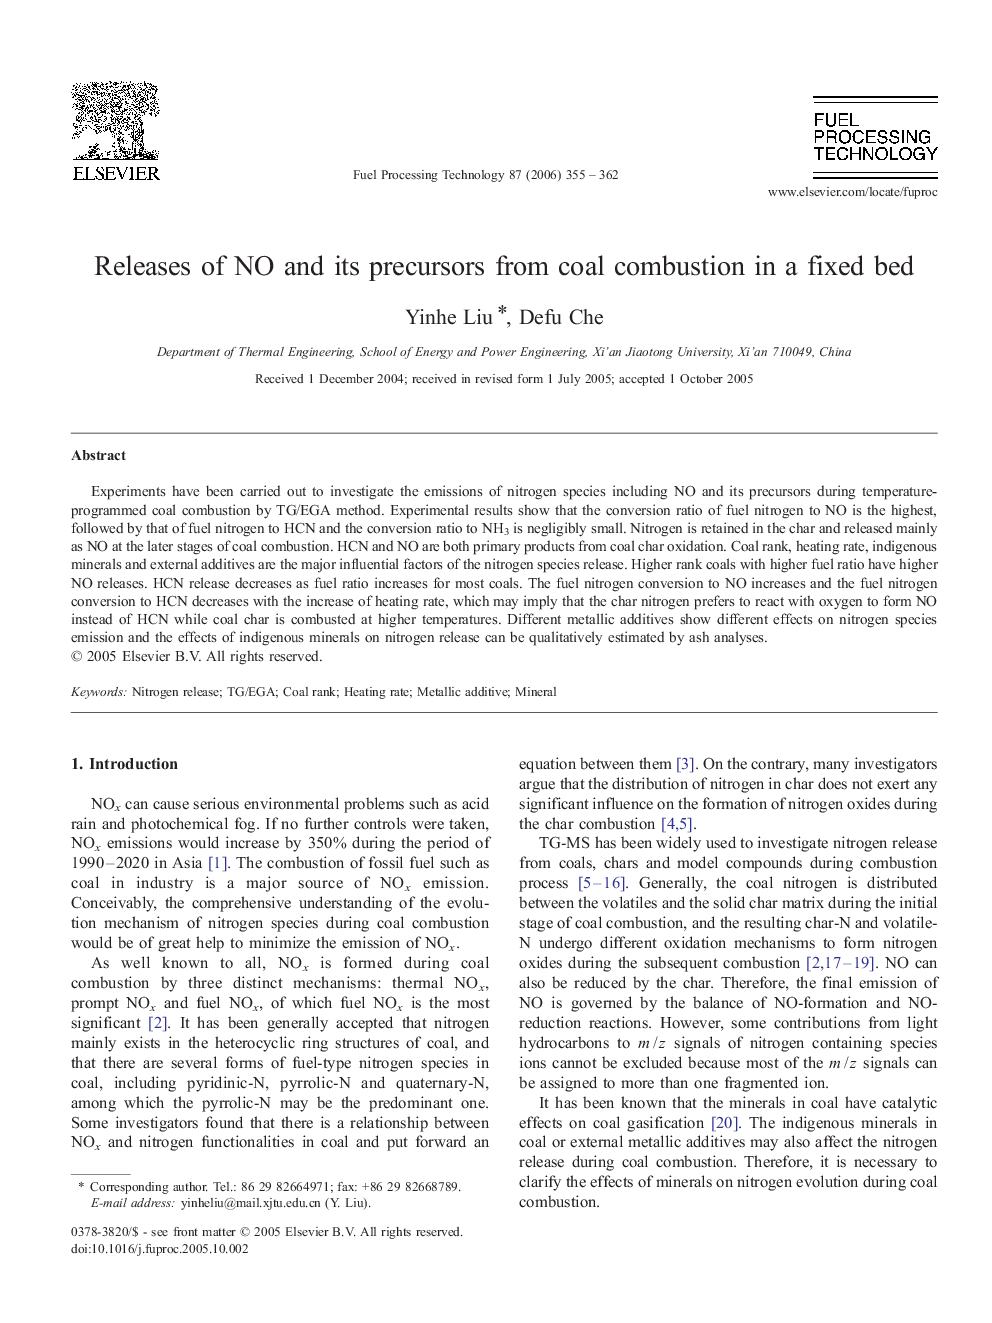 Releases of NO and its precursors from coal combustion in a fixed bed